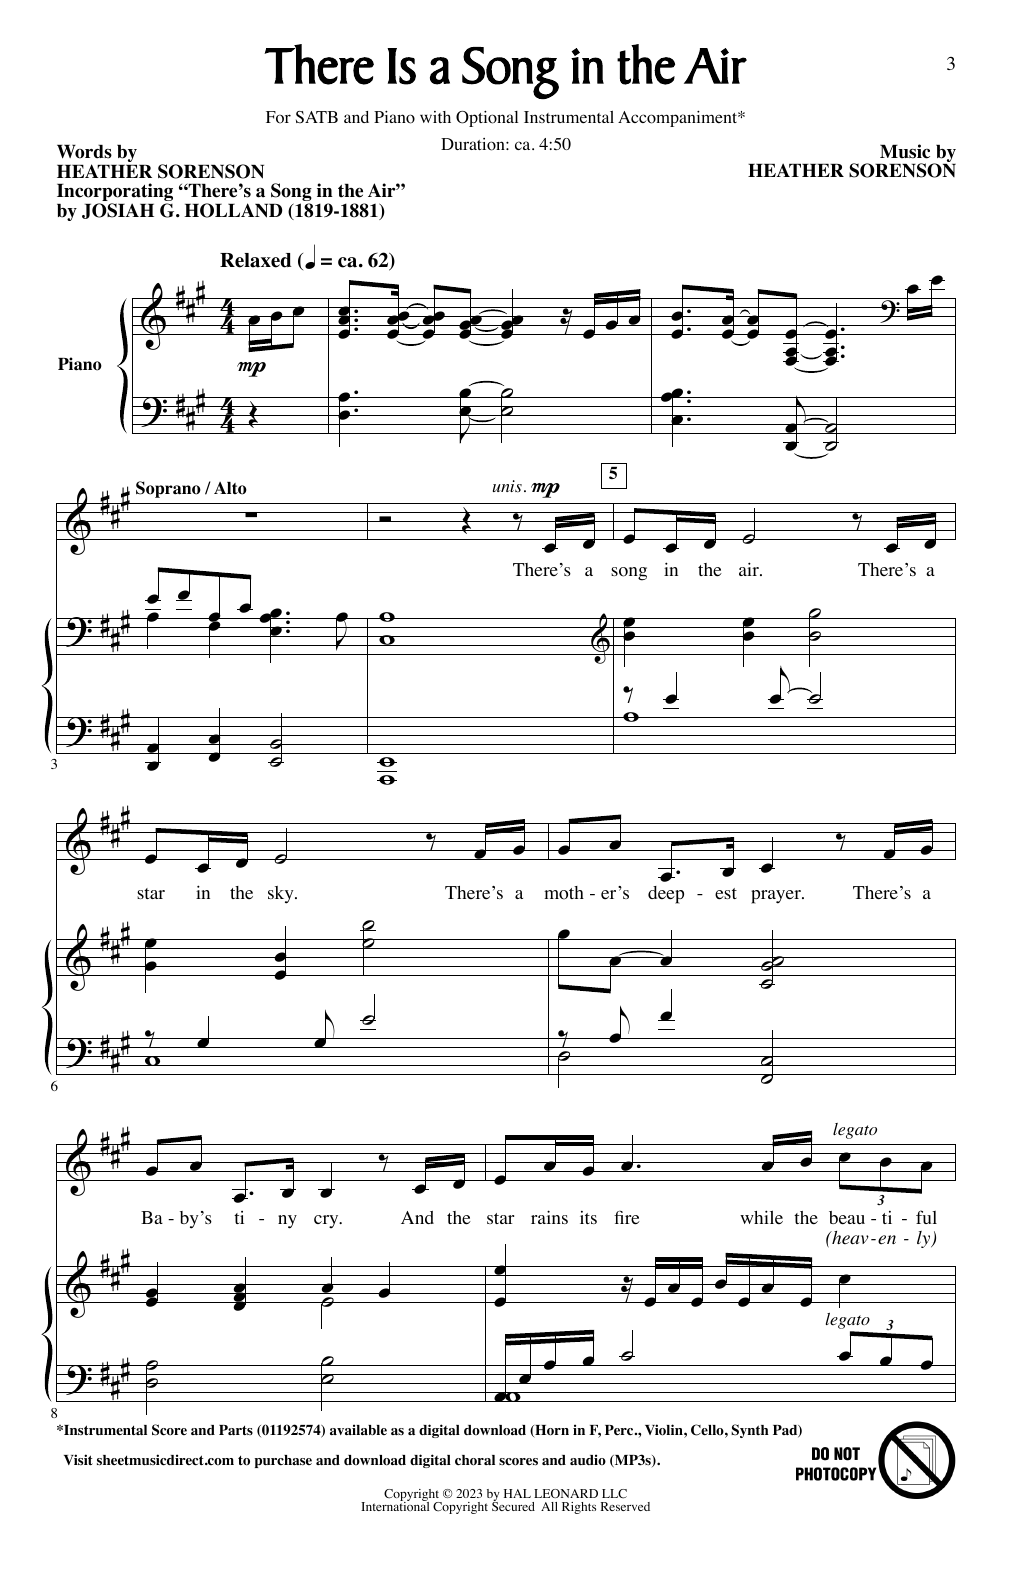 Download Heather Sorenson and Josiah G. Holla There Is A Song In The Air Sheet Music